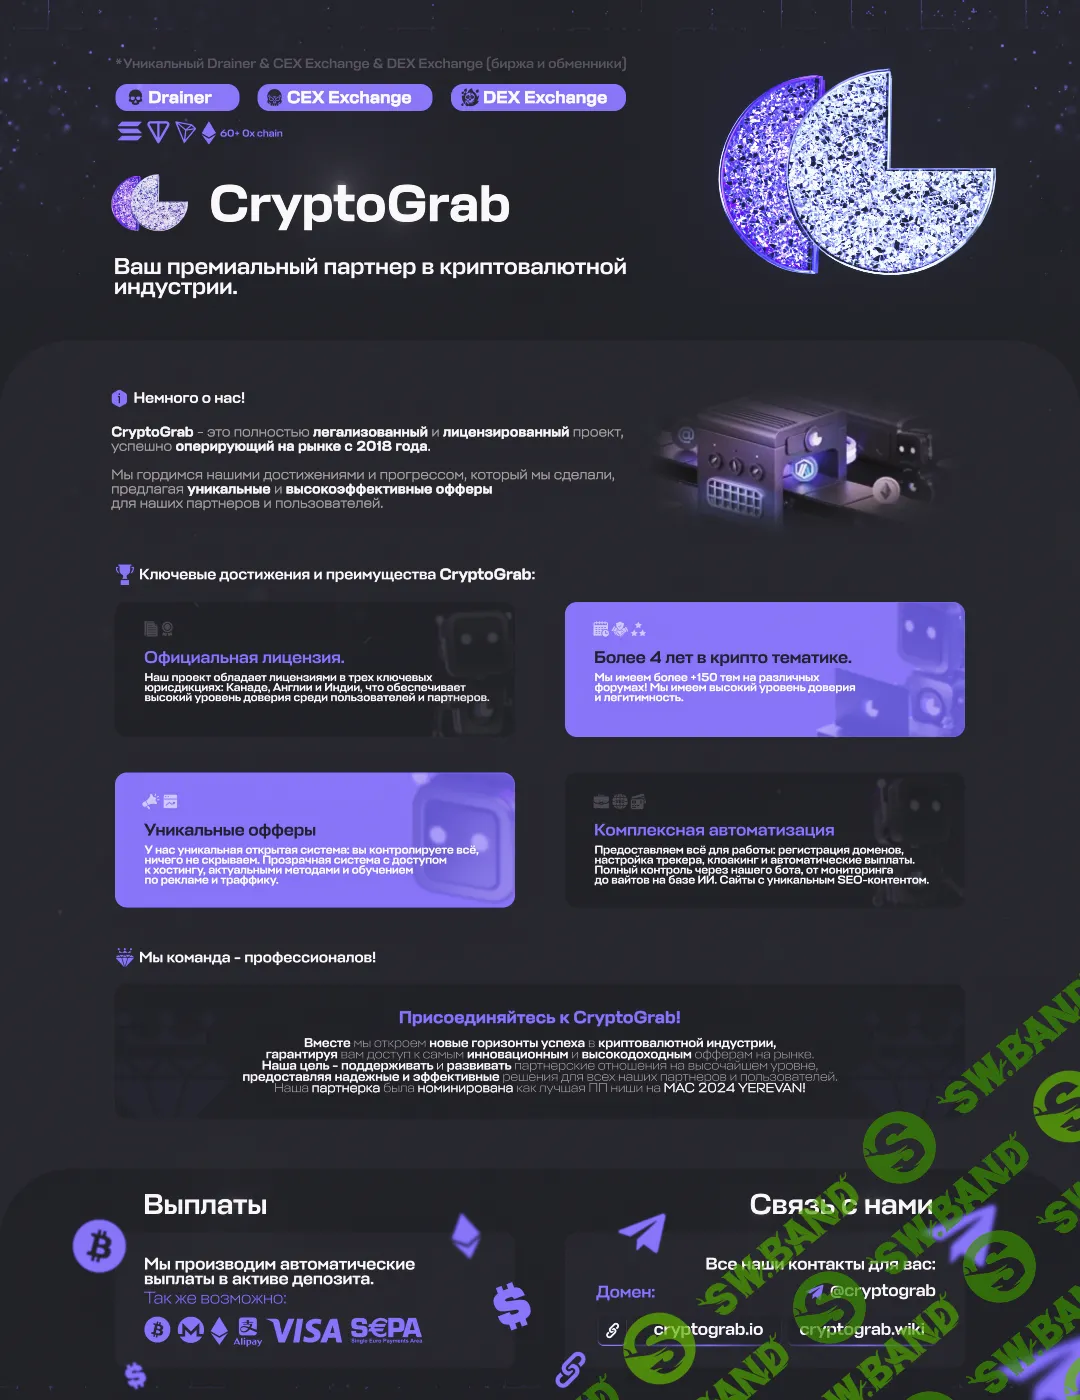 CryptoGrab Affilate, Drainer 60+ chain 0x|TON|TRON, Exchange and more